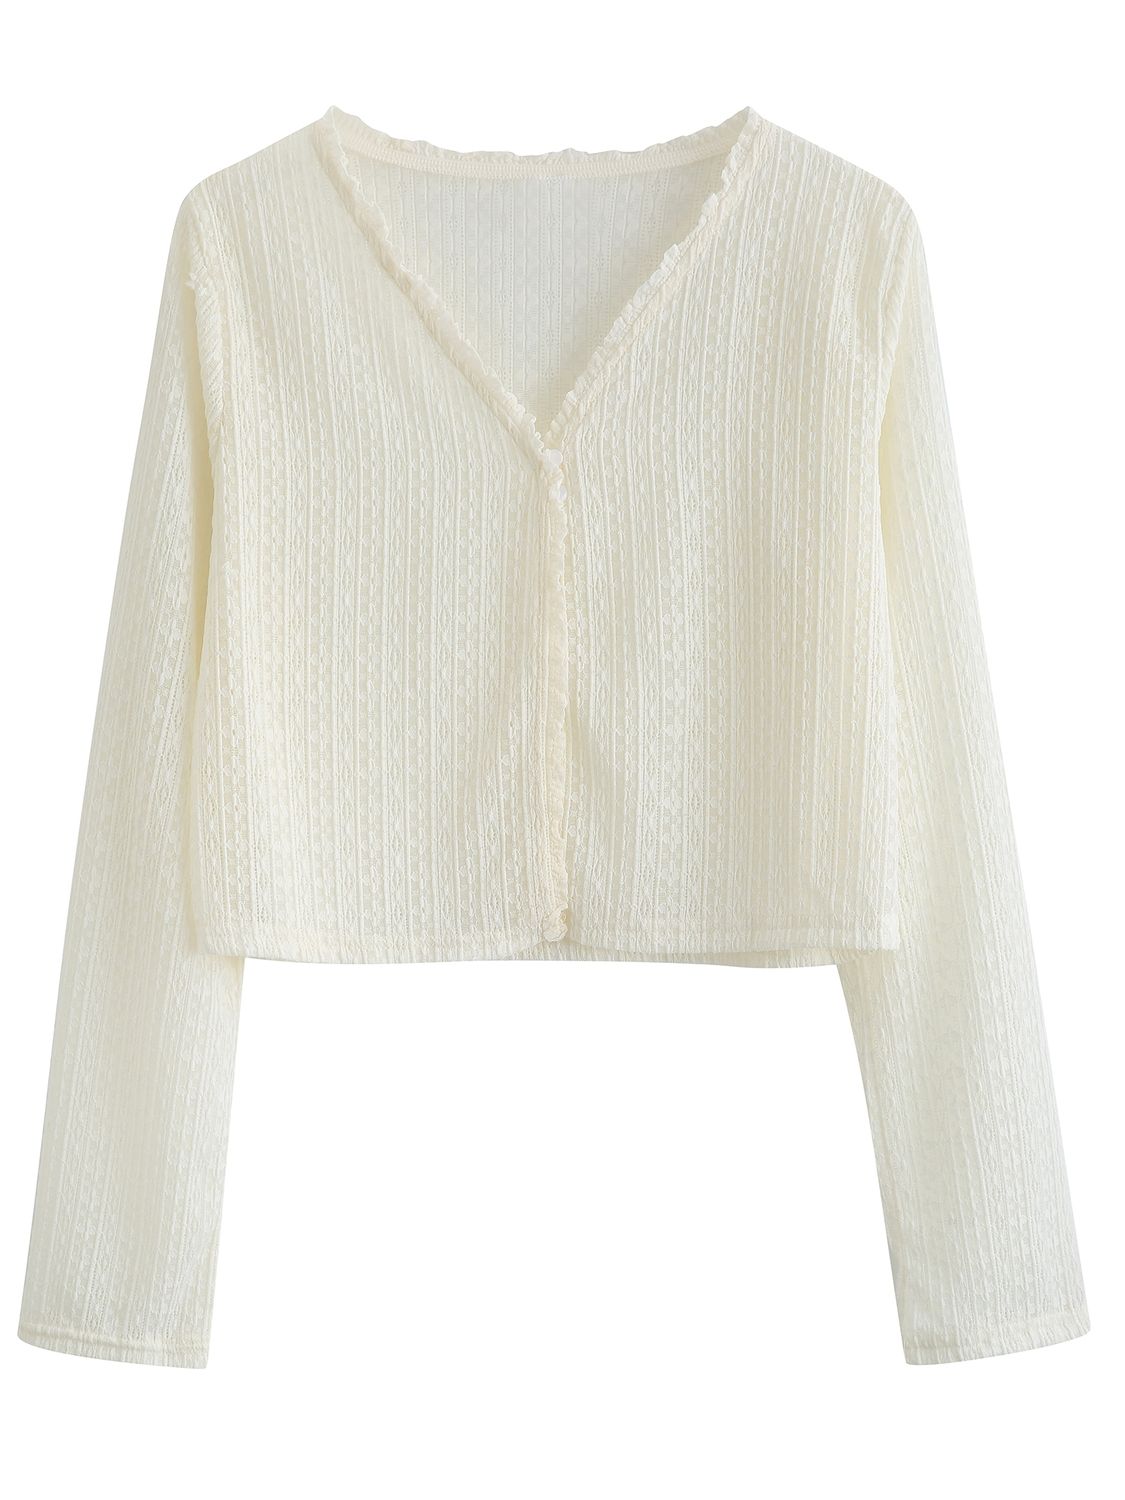 Sweet and thin small coat for women in summer 2023 New cardigan with a top up shawl and suspender skirt Sunscreen jacket